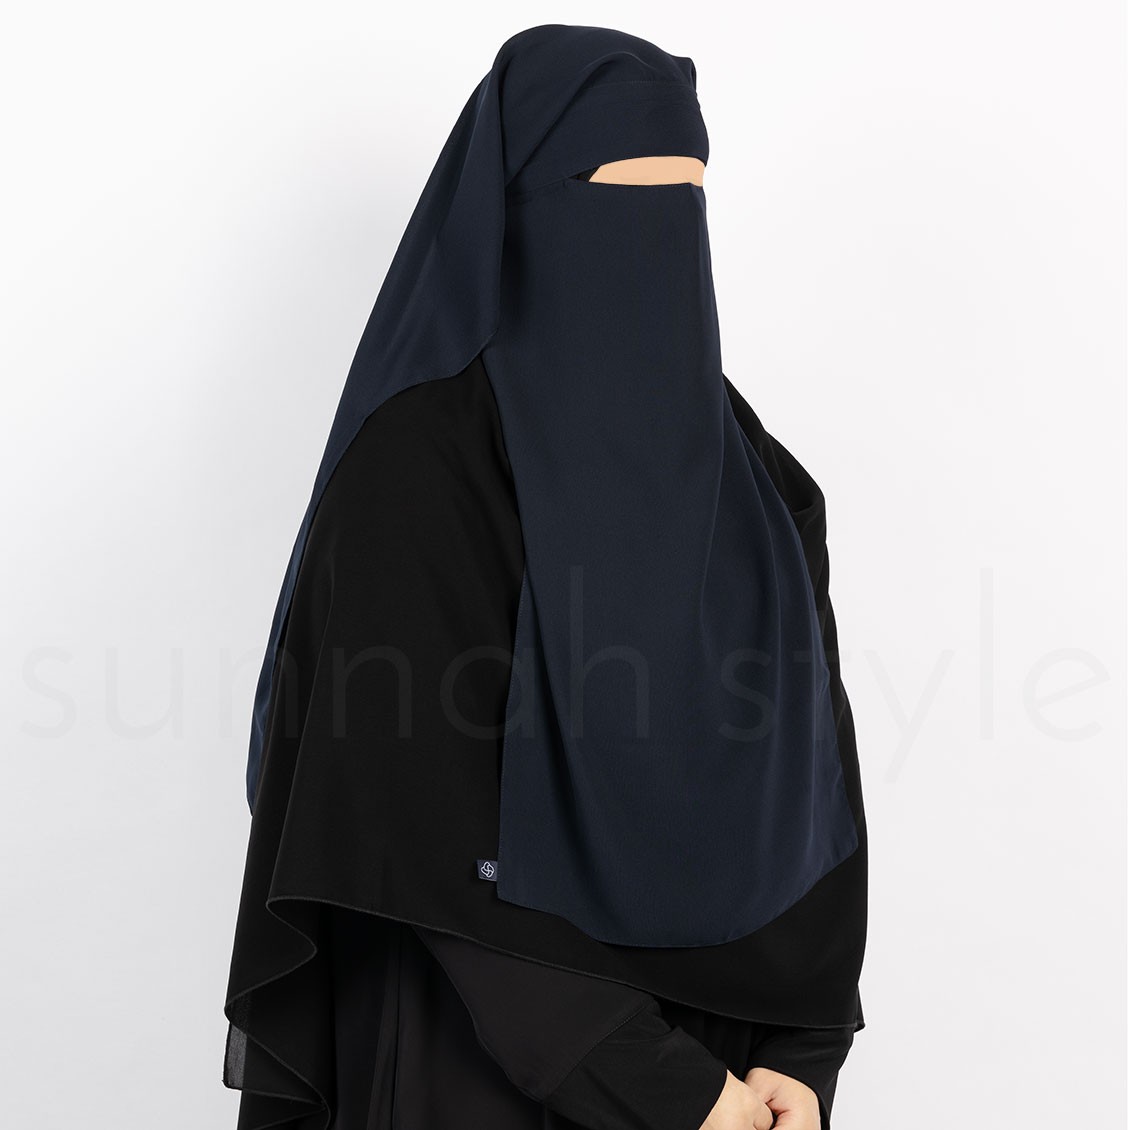 Sunnah Style Long Two Layer Niqab Navy Blue